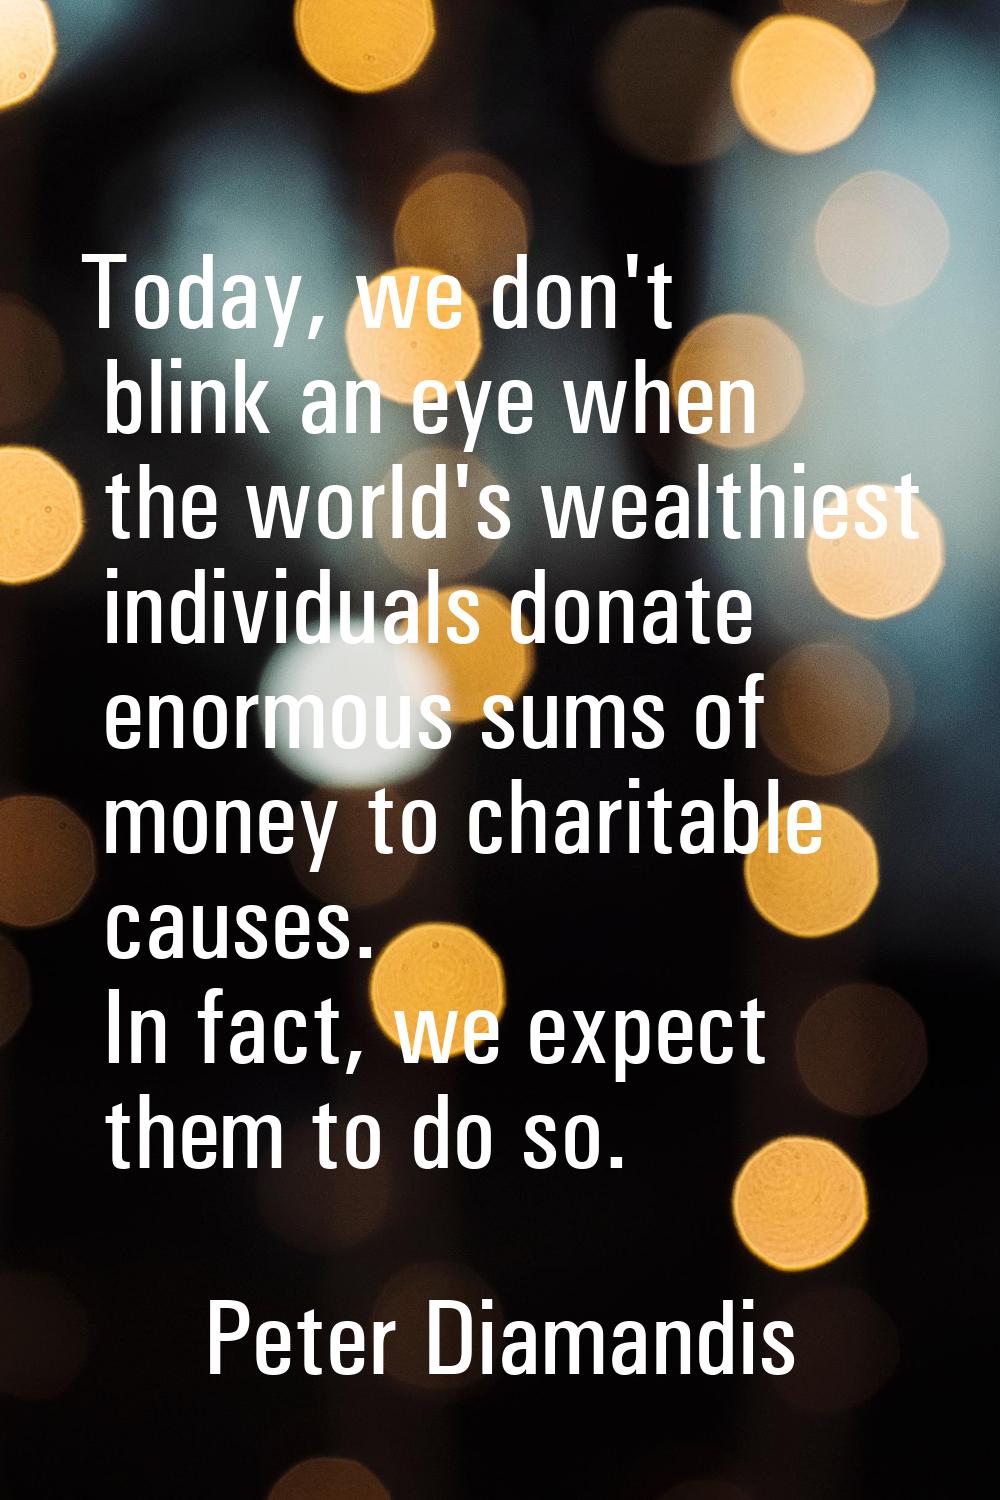 Today, we don't blink an eye when the world's wealthiest individuals donate enormous sums of money 